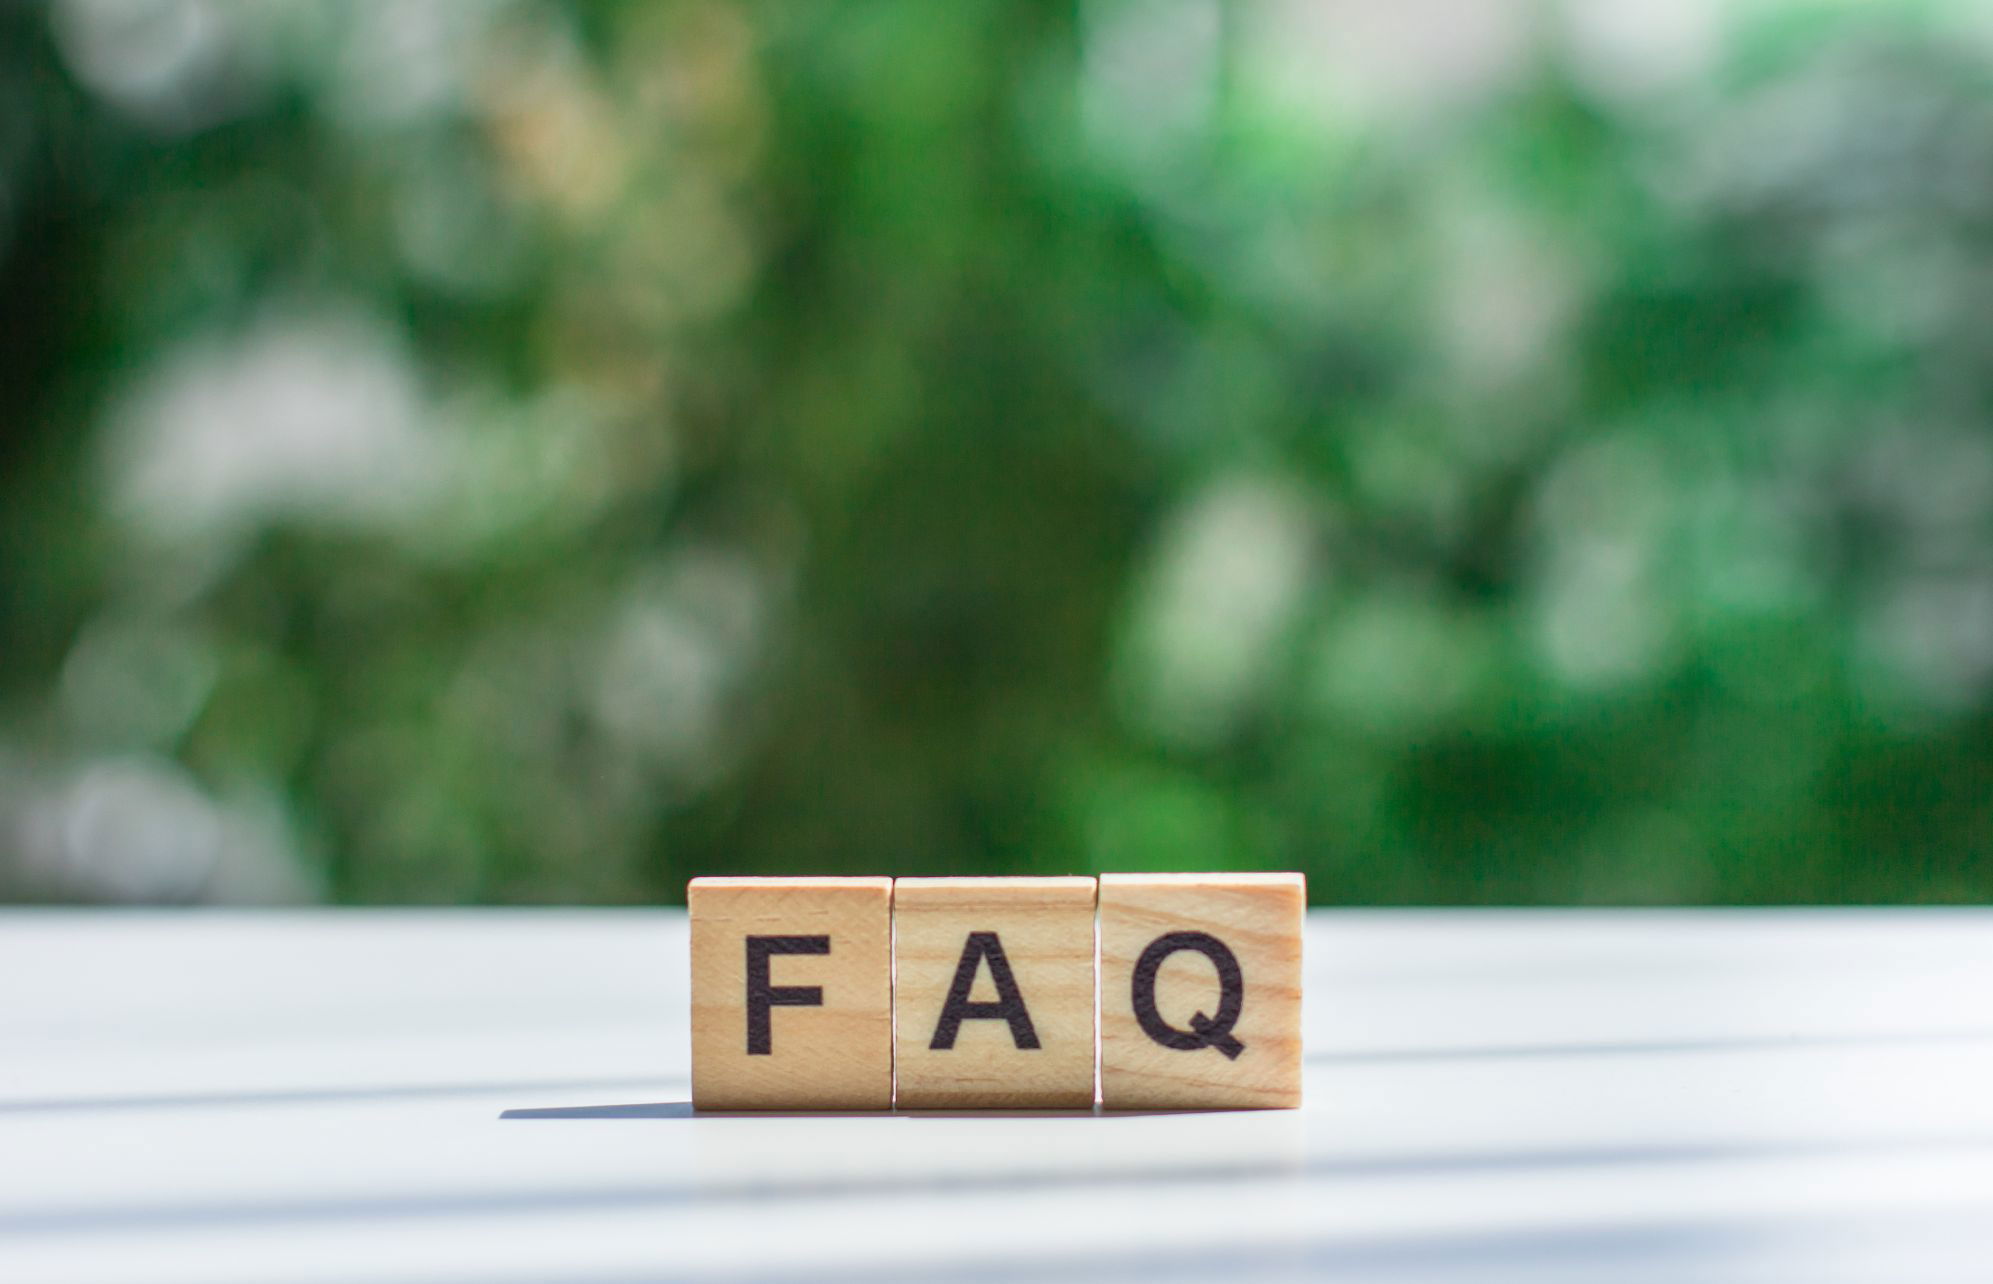 Word faq message sign wooden cubes light table against background green leaves soft focus frequently asked question concept